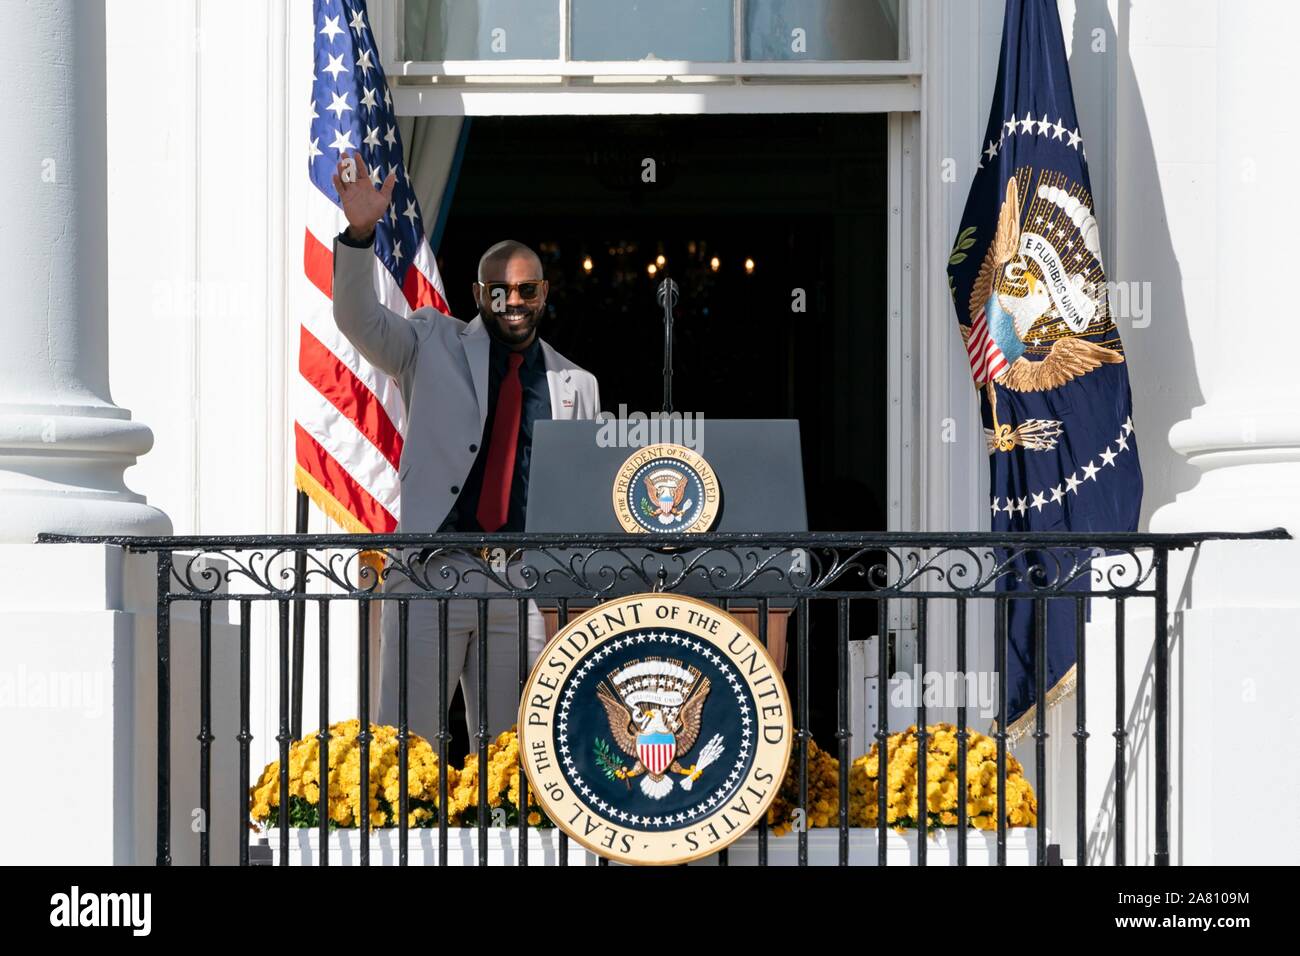 Washington, United States of America. 04 November, 2019. Washington Nationals infielder Howie Kendrick waves from the South Portico balcony of the White House November 4, 2019 in Washington, DC. The 2019 Baseball World Series Champions attended an event in their honor by U.S. President Donald Trump to celebrate their victory.  Credit: Andrea Hanks/White House Photo/Alamy Live News Stock Photo